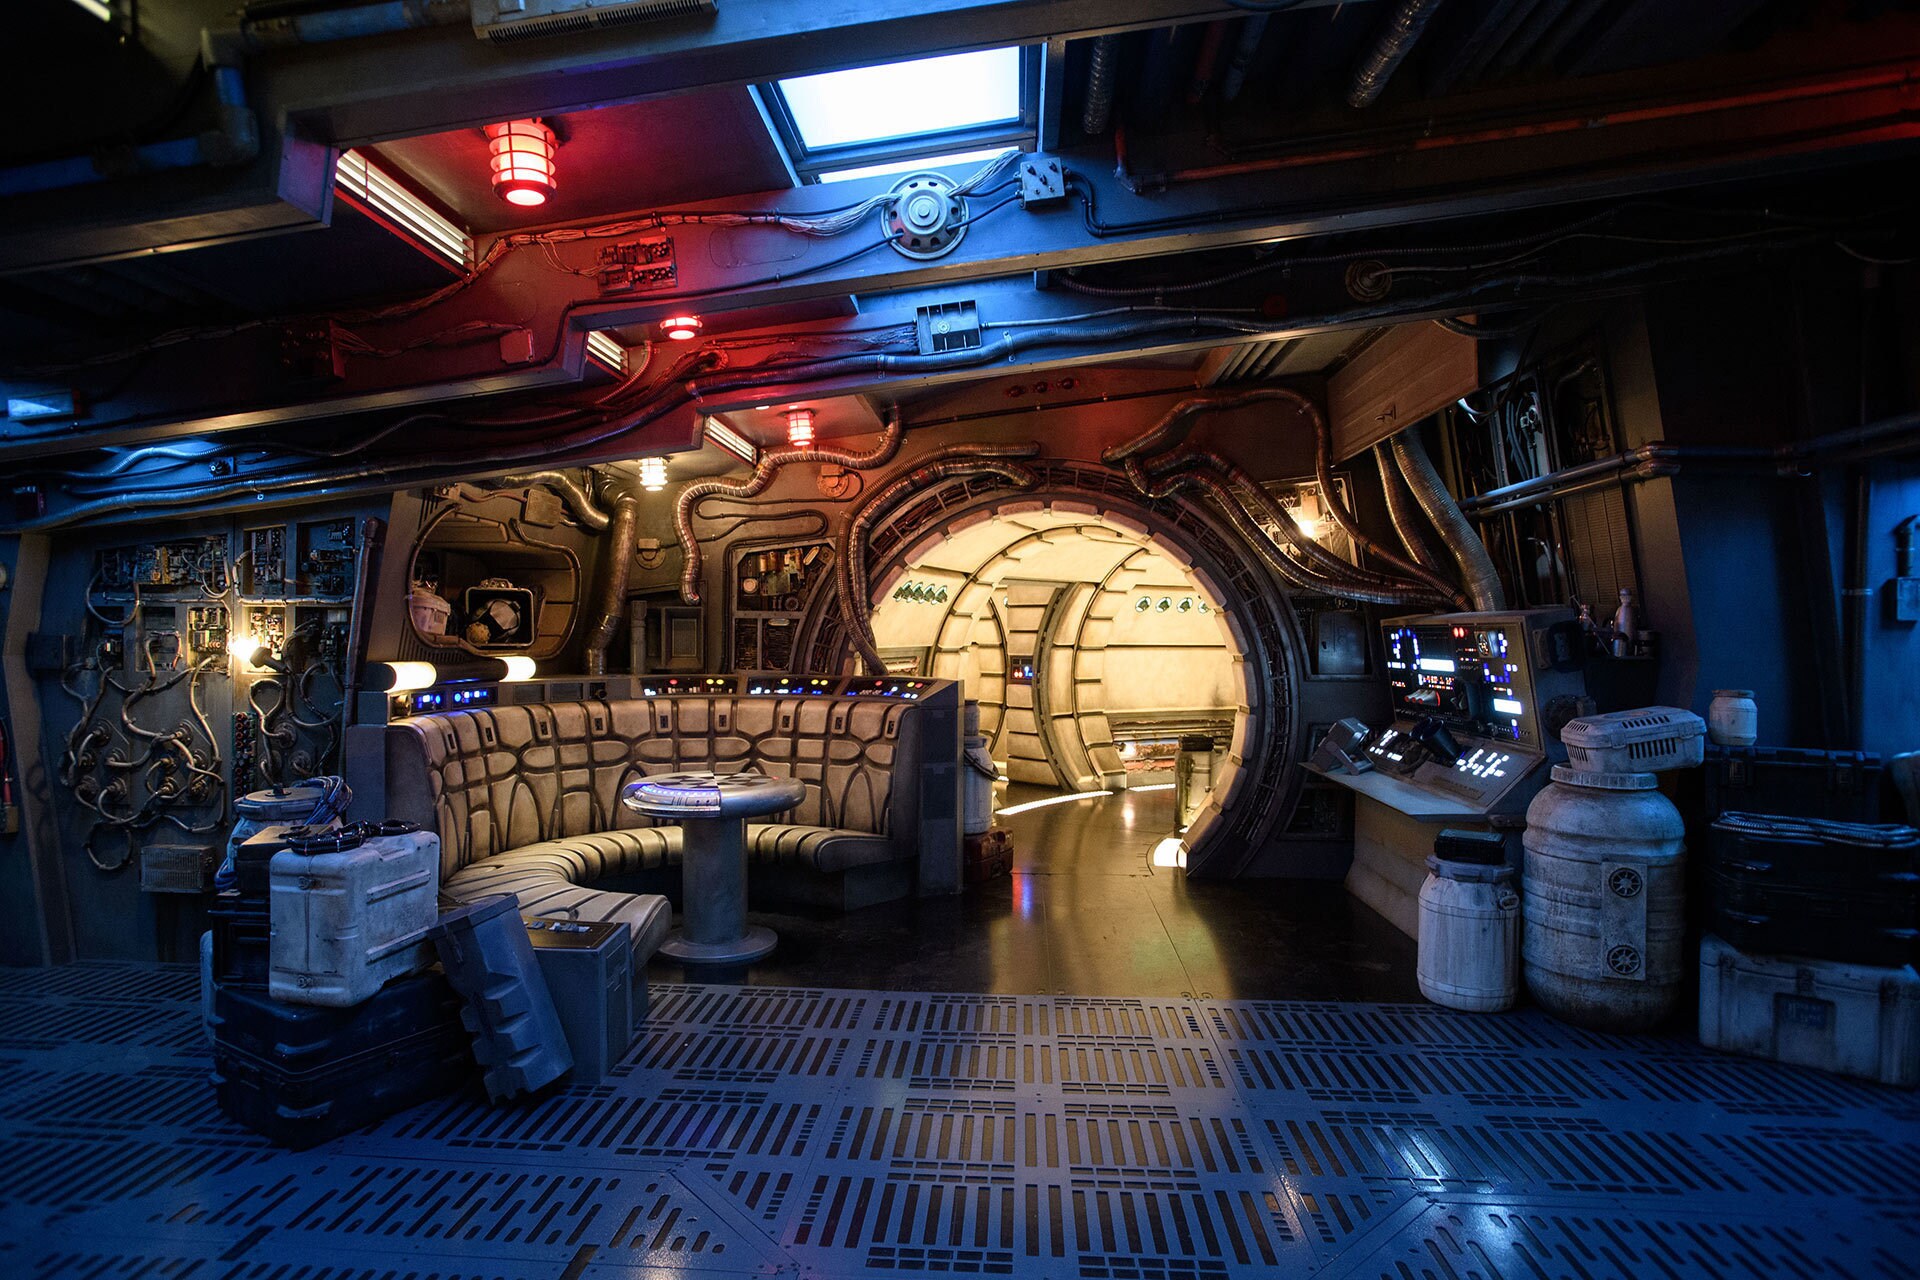 Guests visiting Millennium Falcon: Smugglers Run
will walk the hallways and experience other mem...